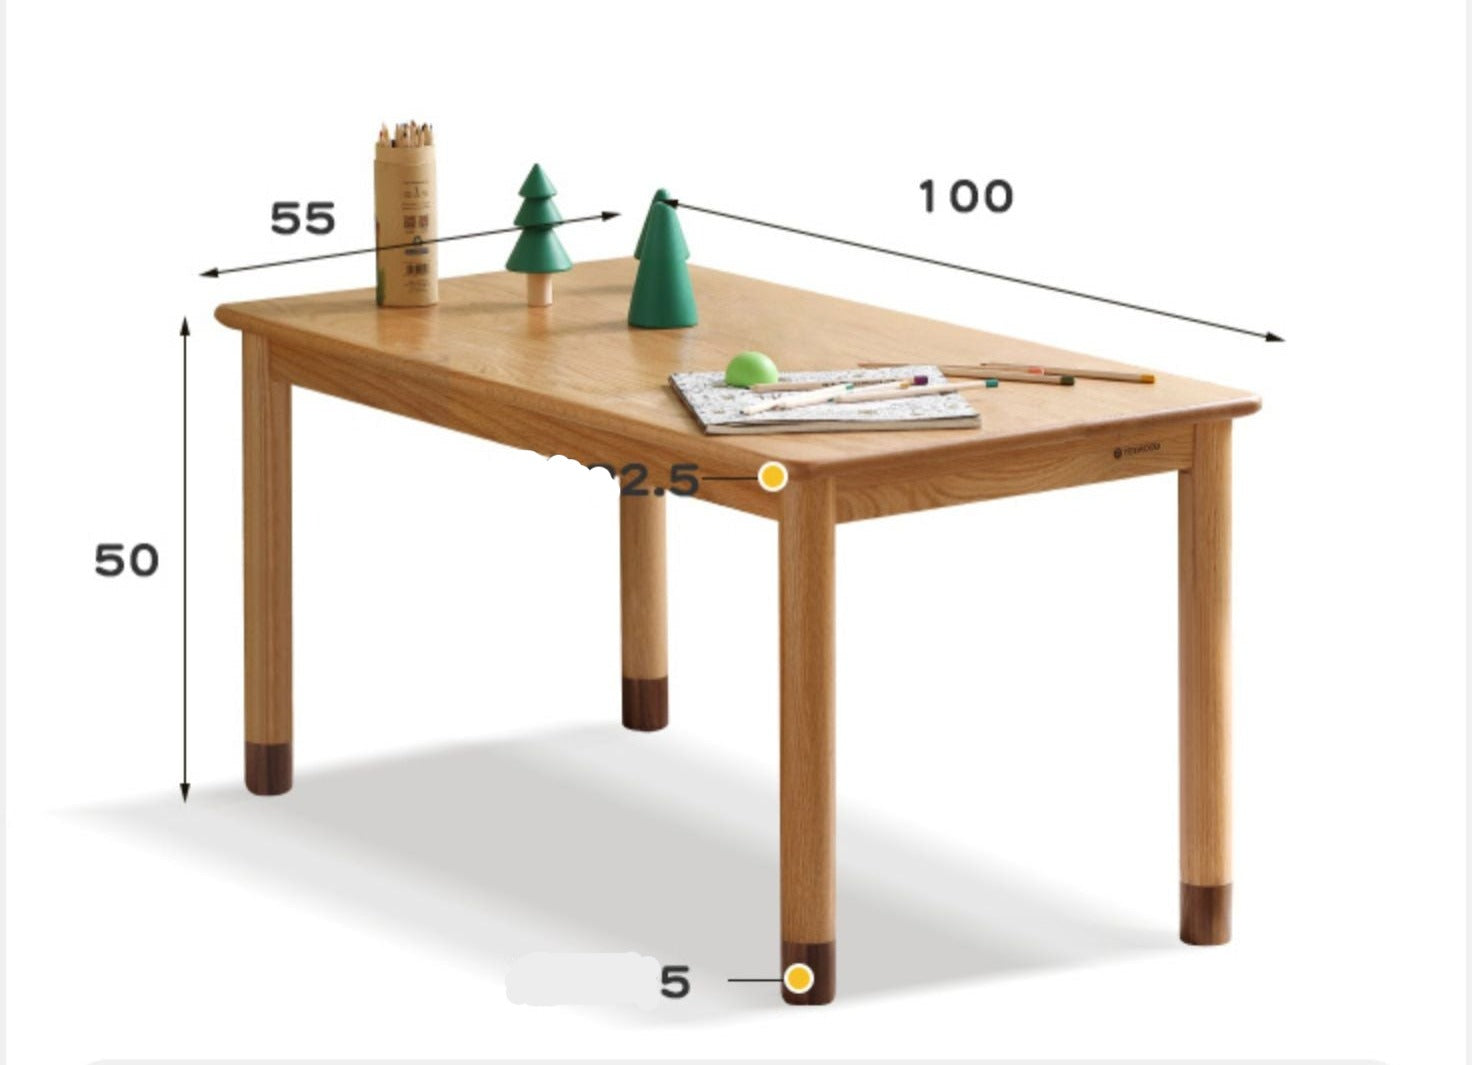 Table primary school, desk for elementary school students"